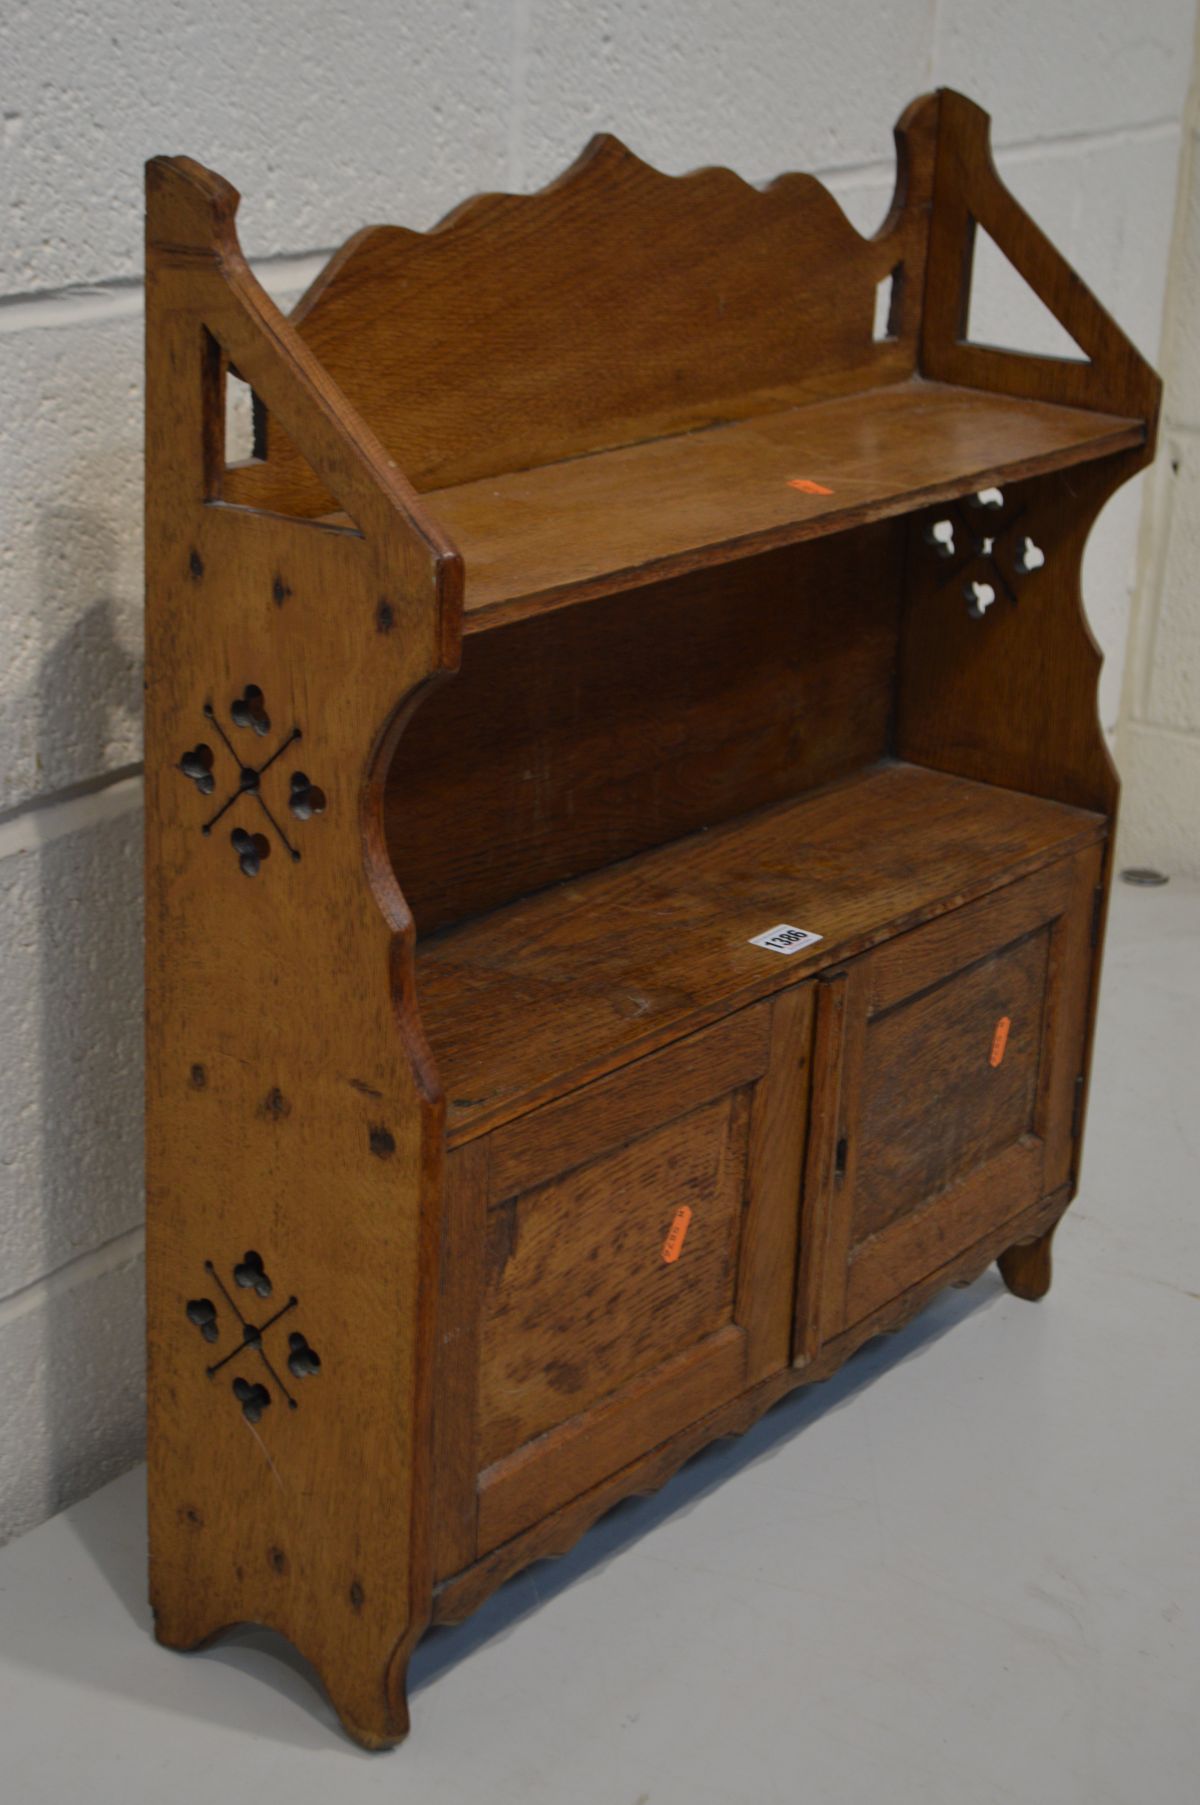 AN EARLY 20TH CENTURY OAK ARTS AND CRAFTS HANGING BOOKSHELF with a two door cupboard - Image 2 of 4